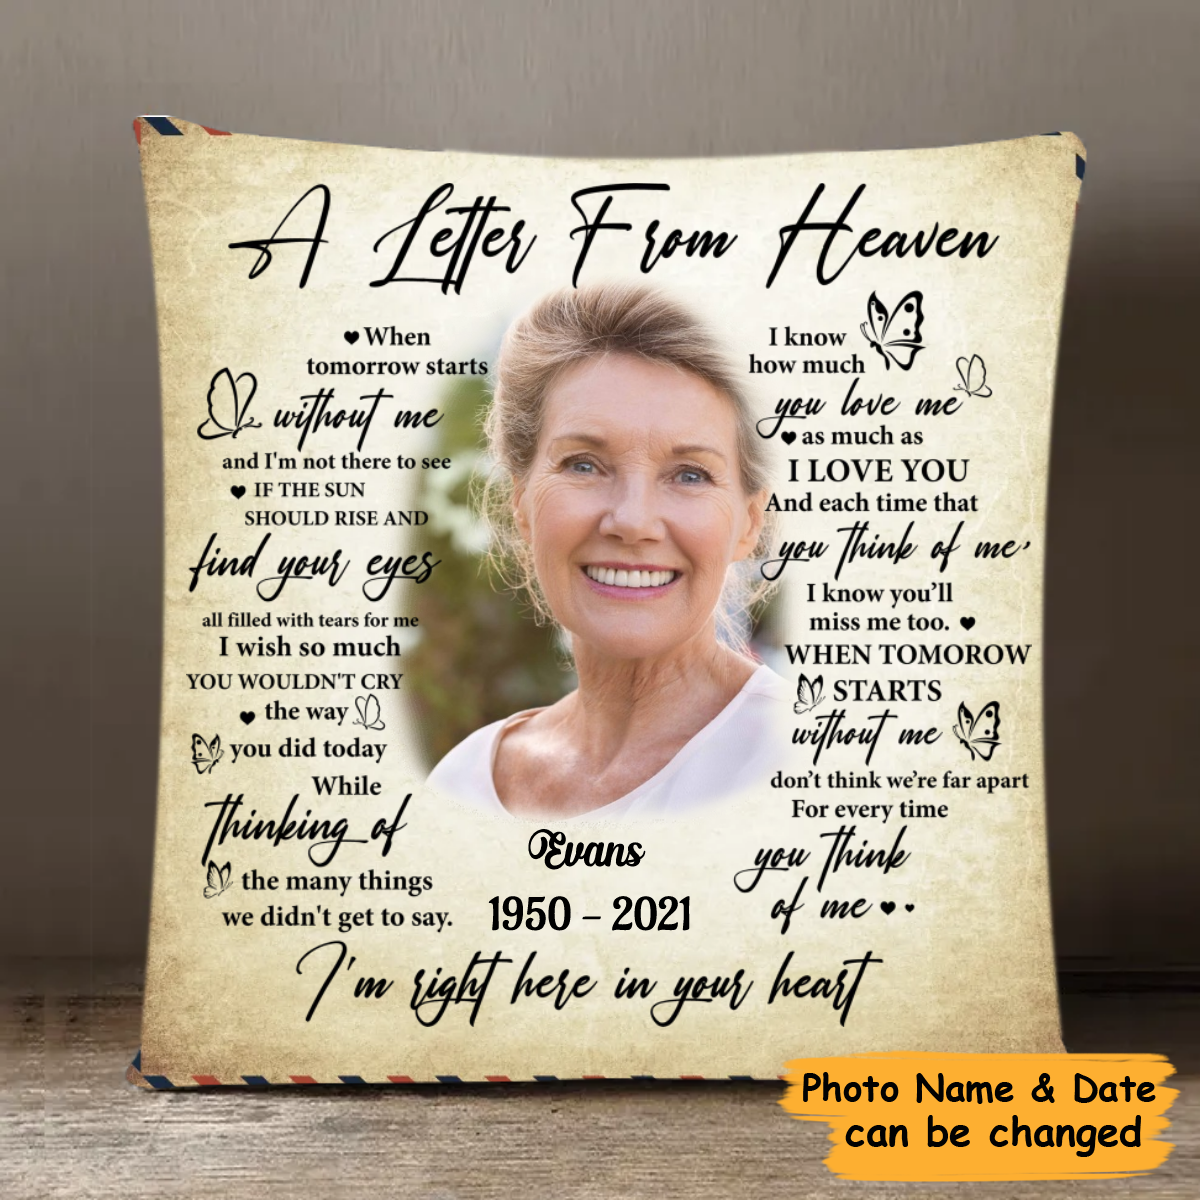 Memorial Gift Idea For Family - A Letter From Heaven Personalized Pillow